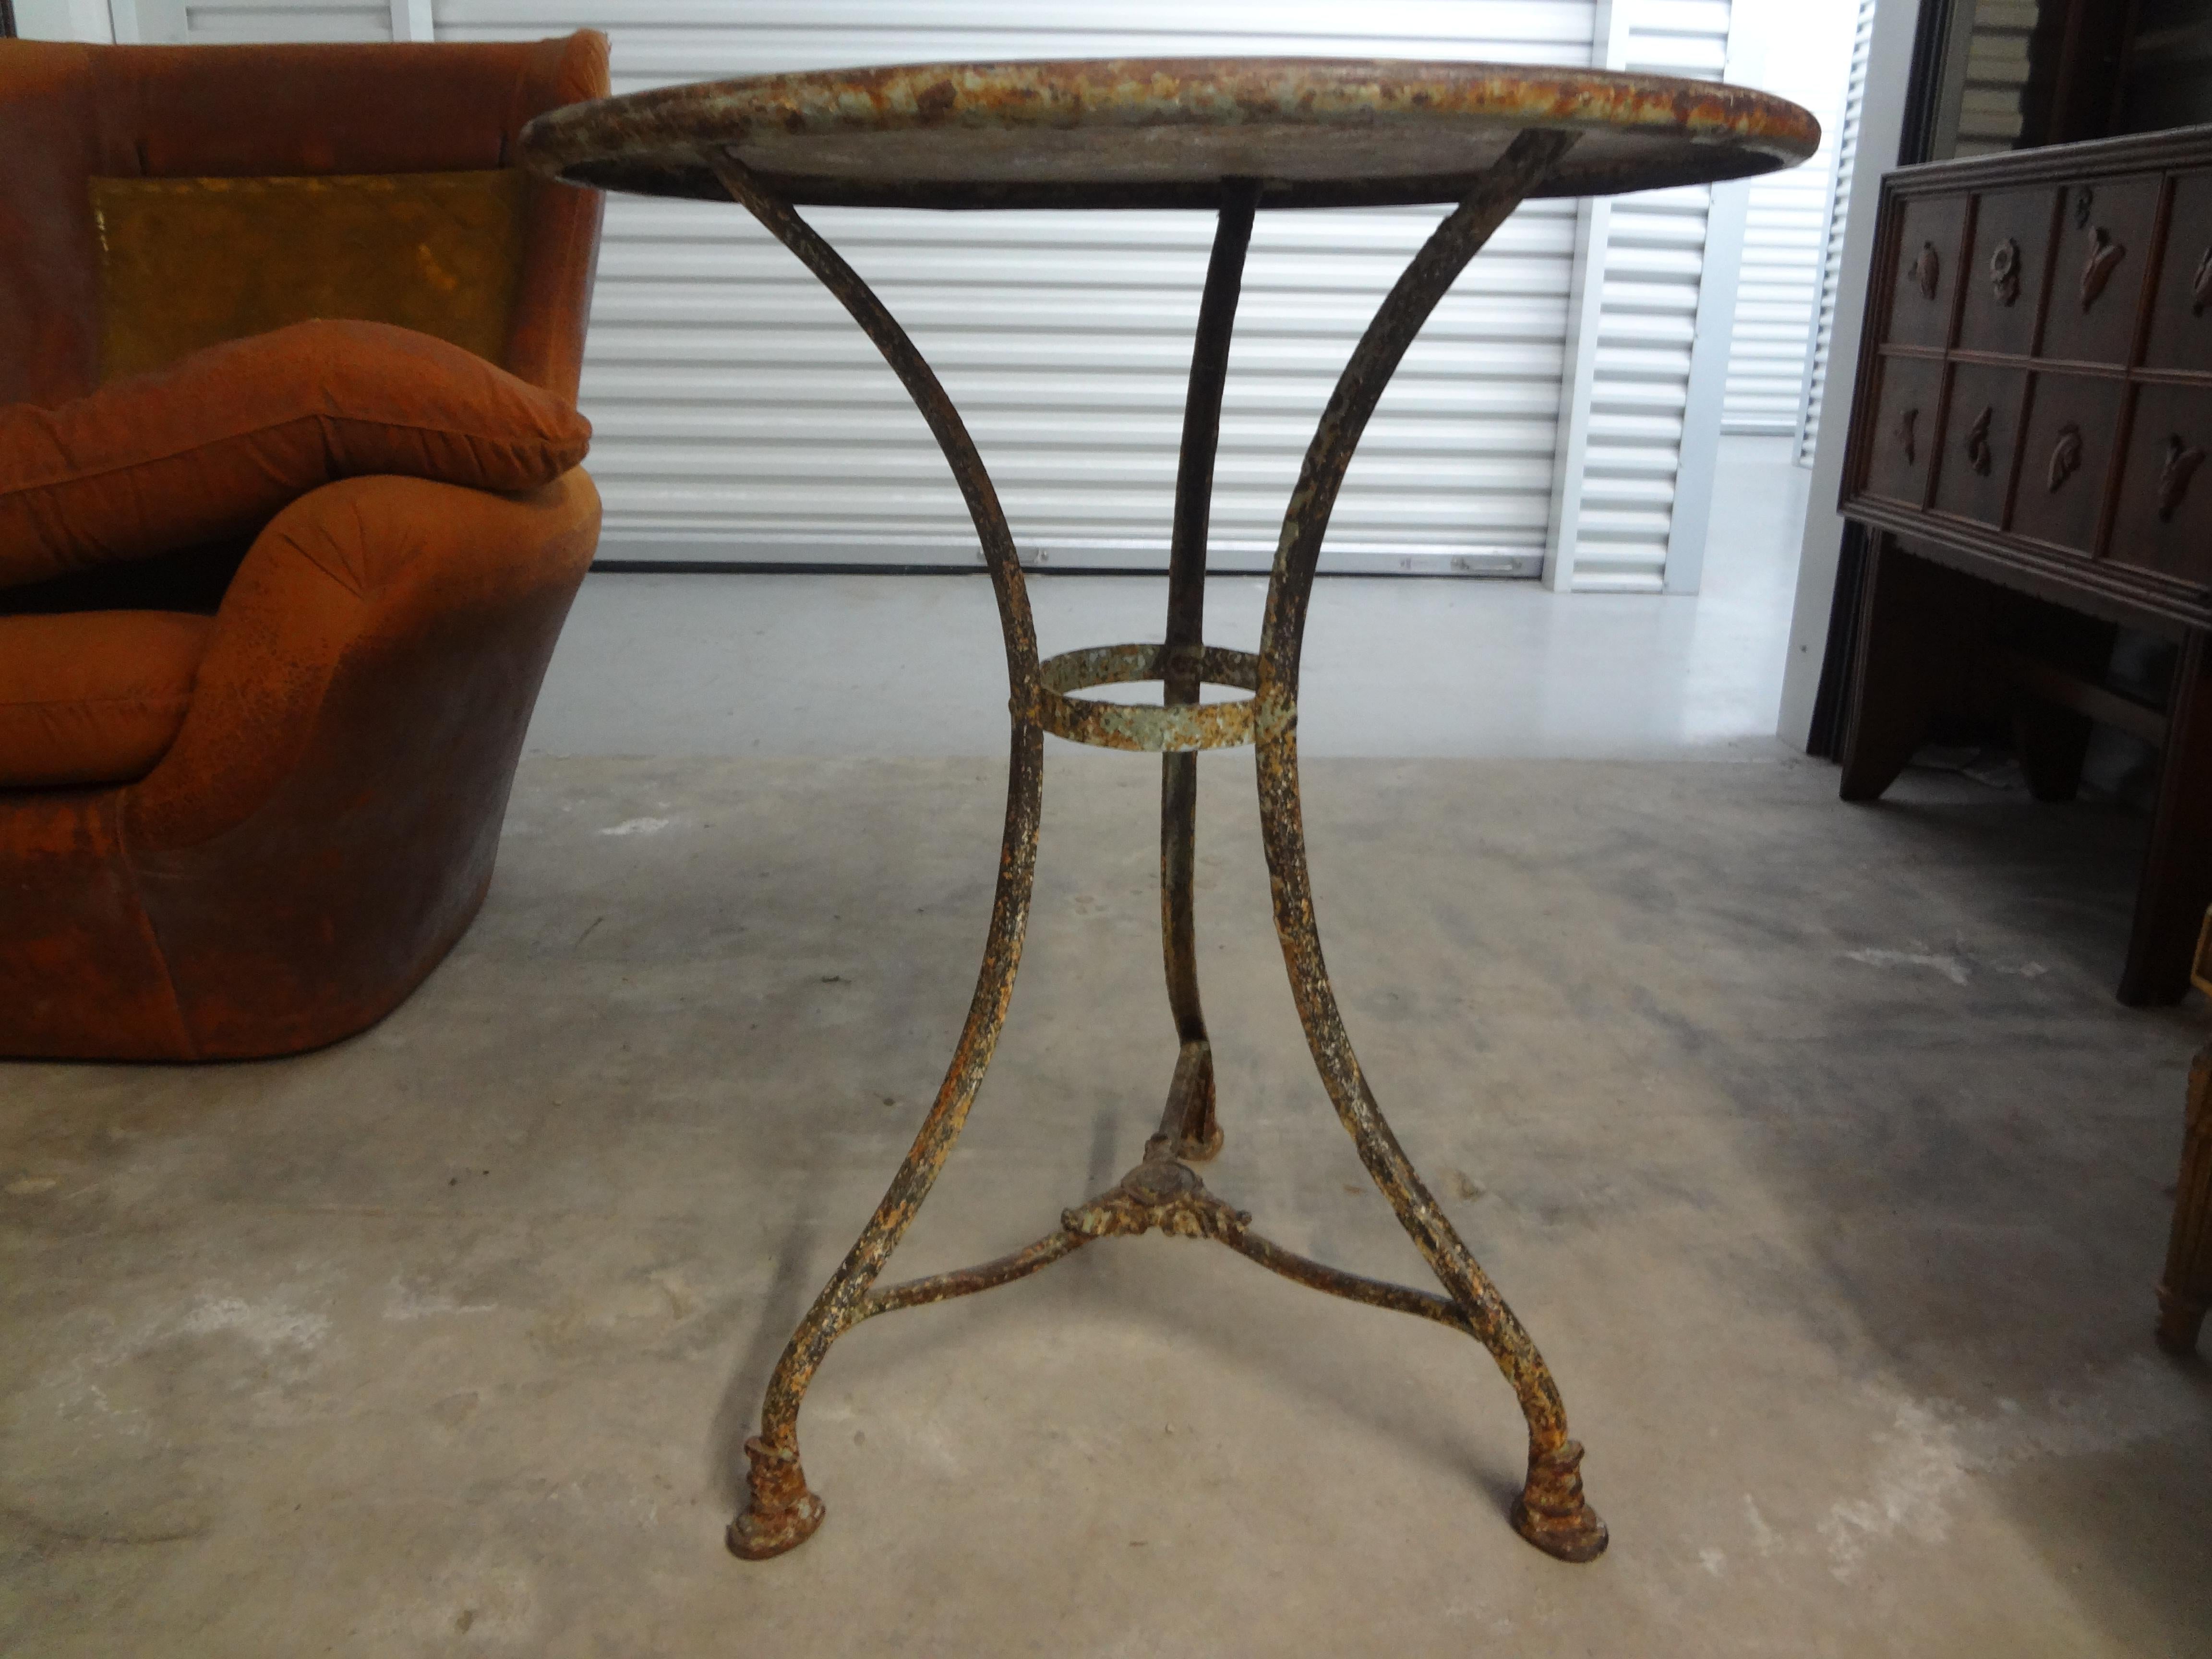 Belle Époque 19th Century French Garden Table By Arras Foundry For Sale